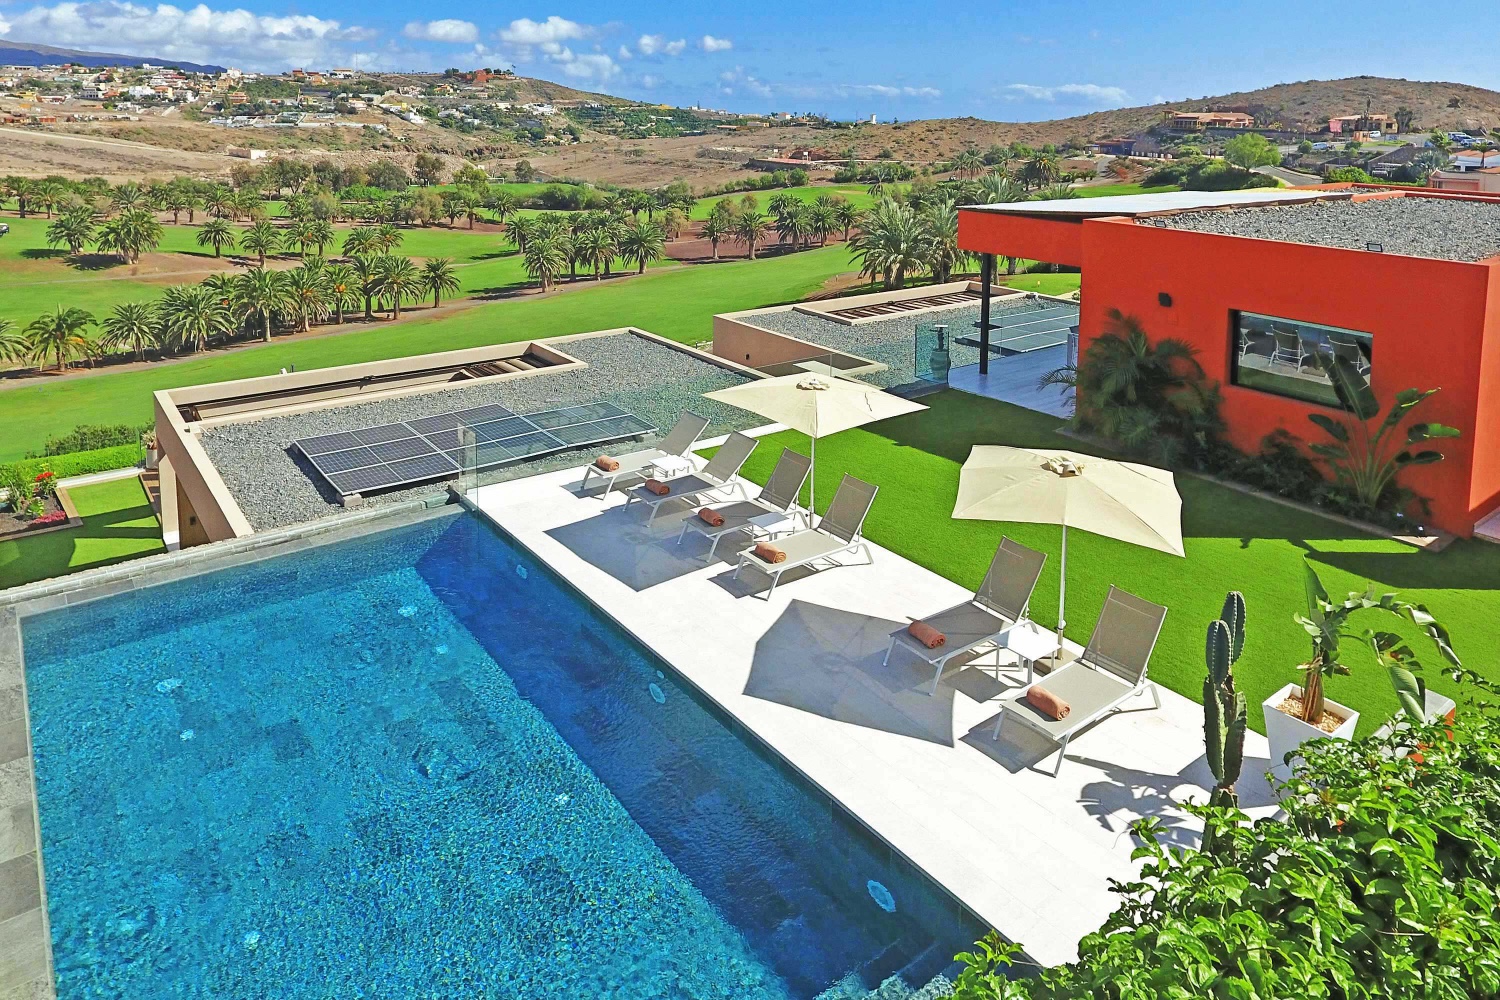 Unique and wonderful single-story home in Salobre Golf Resort, this luxury house has all the amenities to enjoy your sunny vacation in Gran Canaria